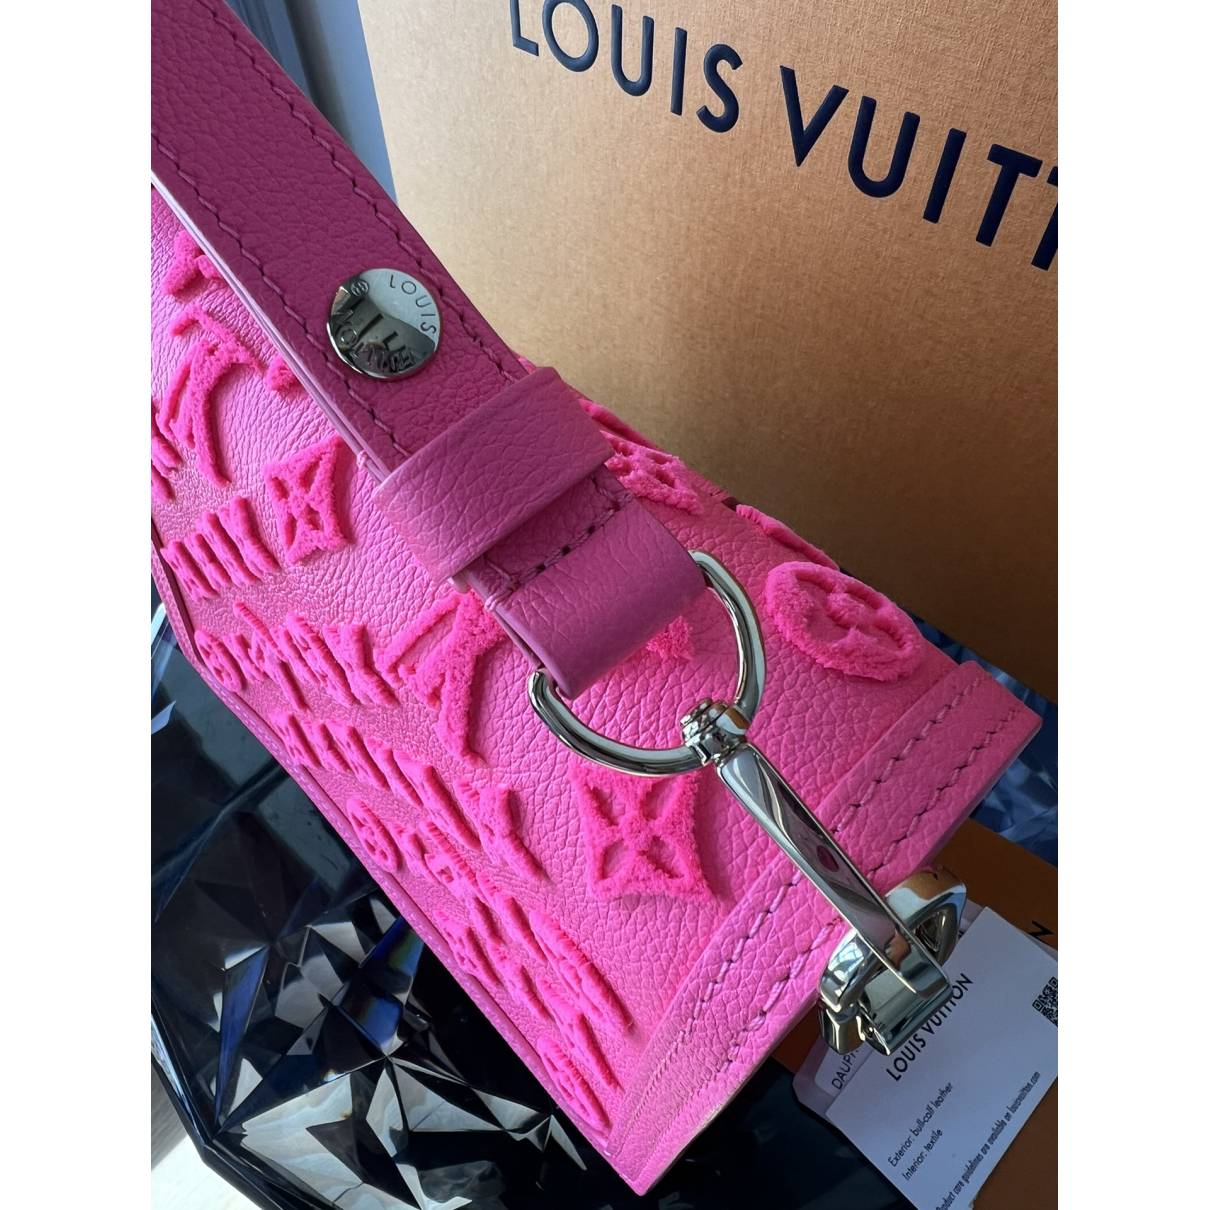 Louis Vuitton - Authenticated Dauphine Mini Handbag - Leather Pink For Woman, Very Good condition